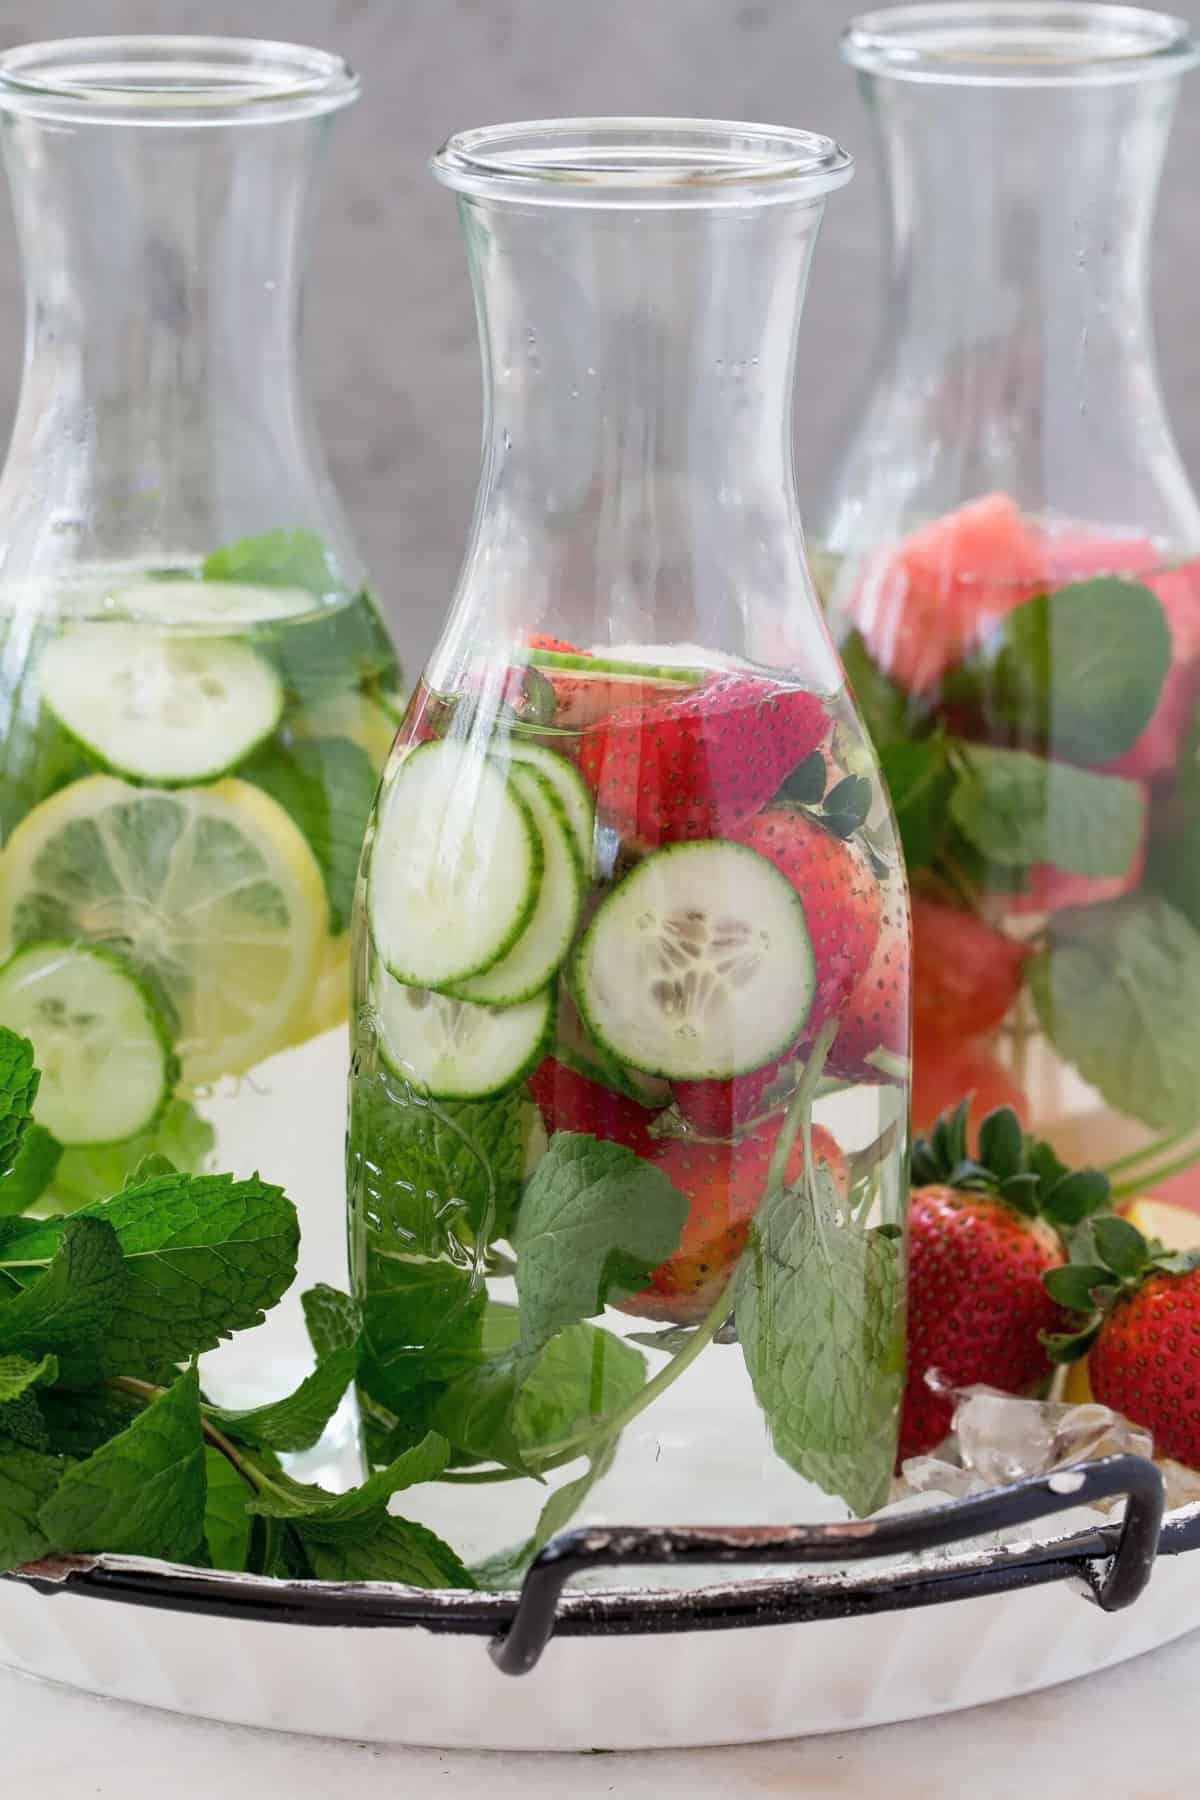 https://www.theharvestkitchen.com/wp-content/uploads/2019/11/infused-water-recipes-1-scaled.jpg